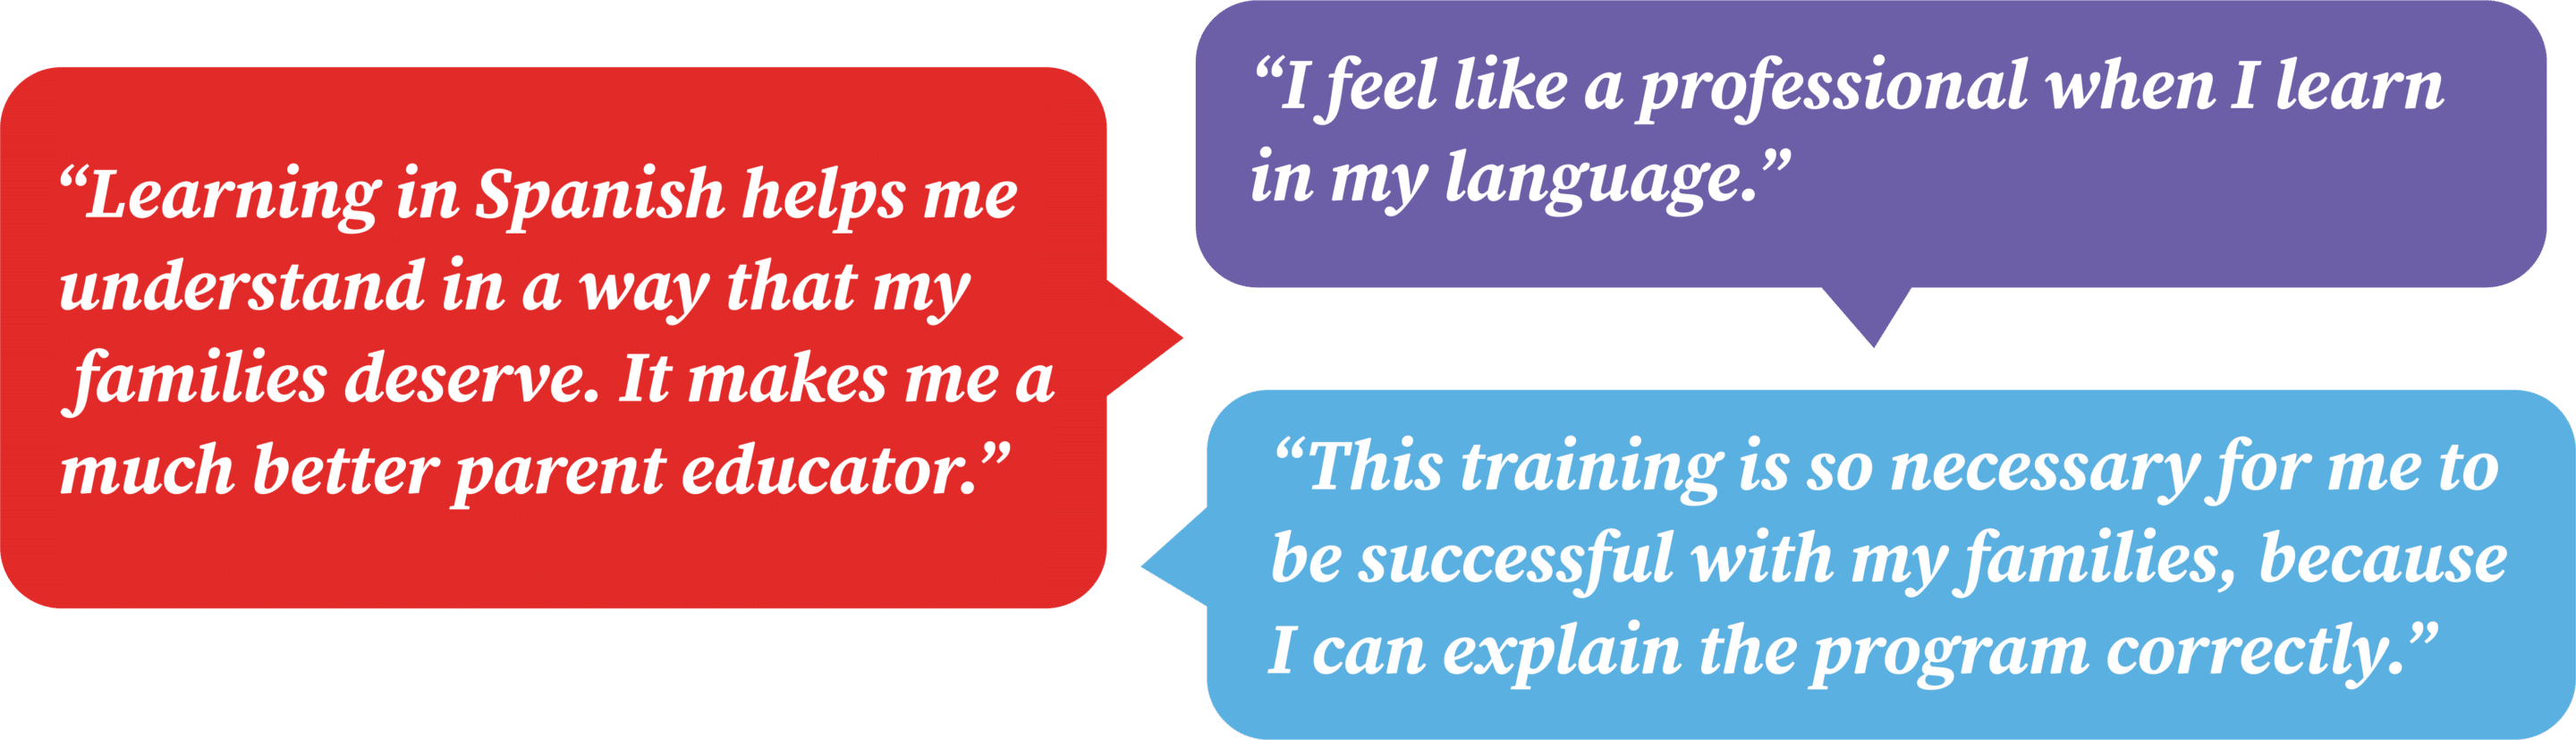 “This training is so necessary for me to be successful with my families, because I can explain the program correctly.”</p>
<p>“I feel like a professional when I learn in my language.”</p>
<p>“Learning in Spanish, helps me understand in a way that my families deserve. It makes me a much better parent educator.”